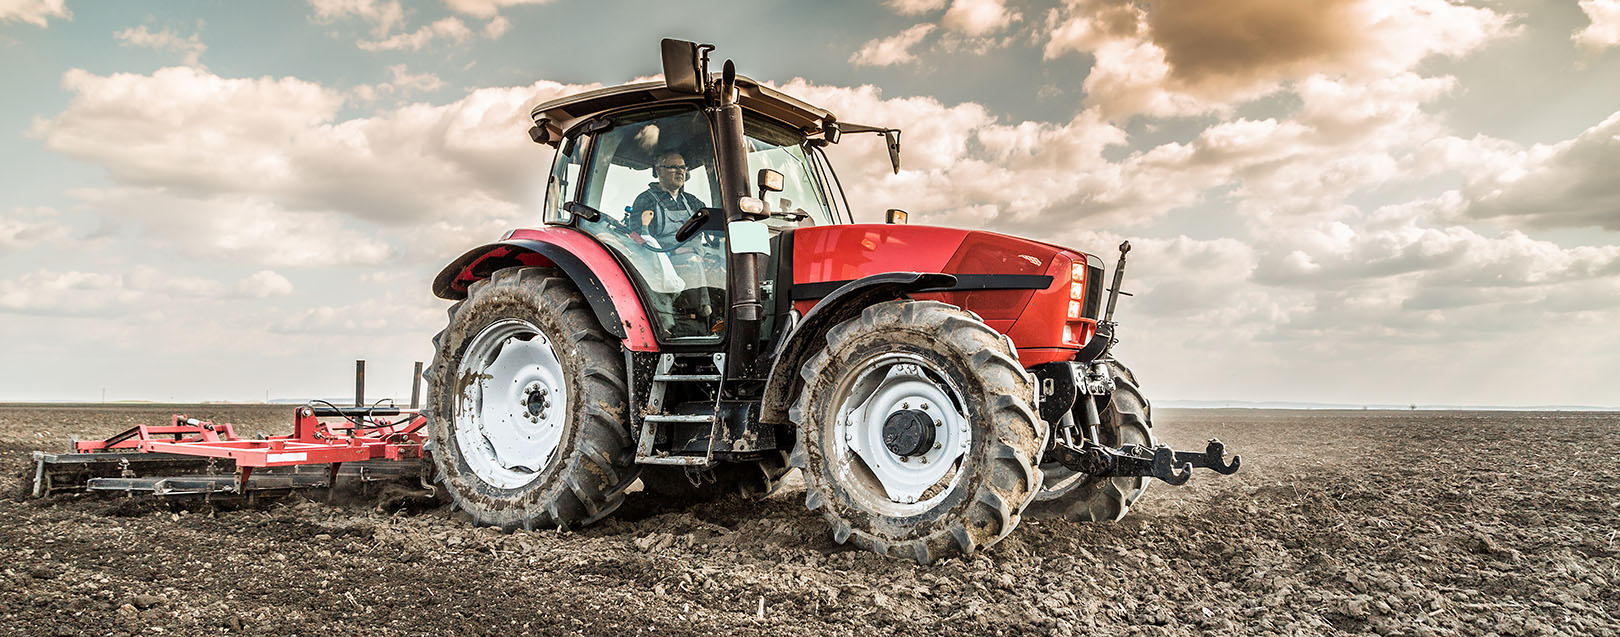 Mahindra tractor exports decline 7% in July